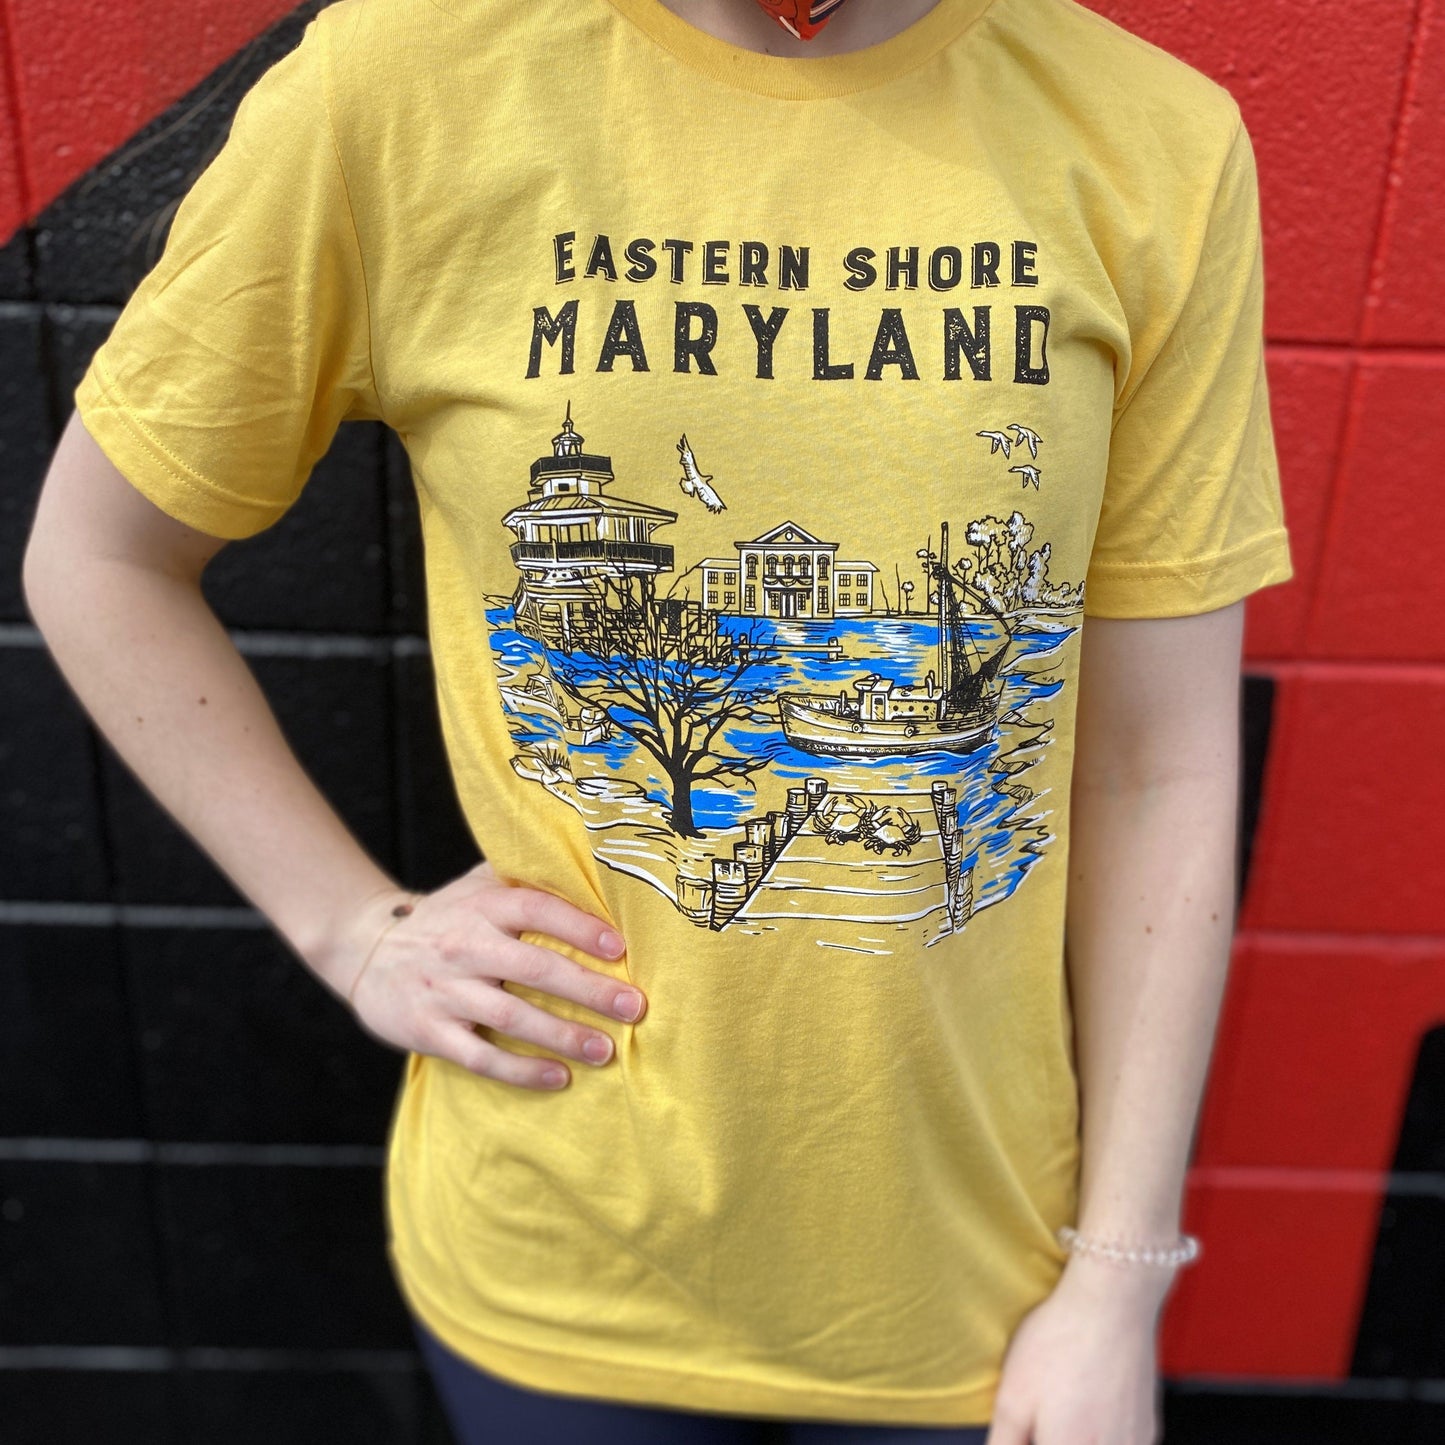 Eastern Shore Maryland (Golden Yellow) / Shirt - Route One Apparel